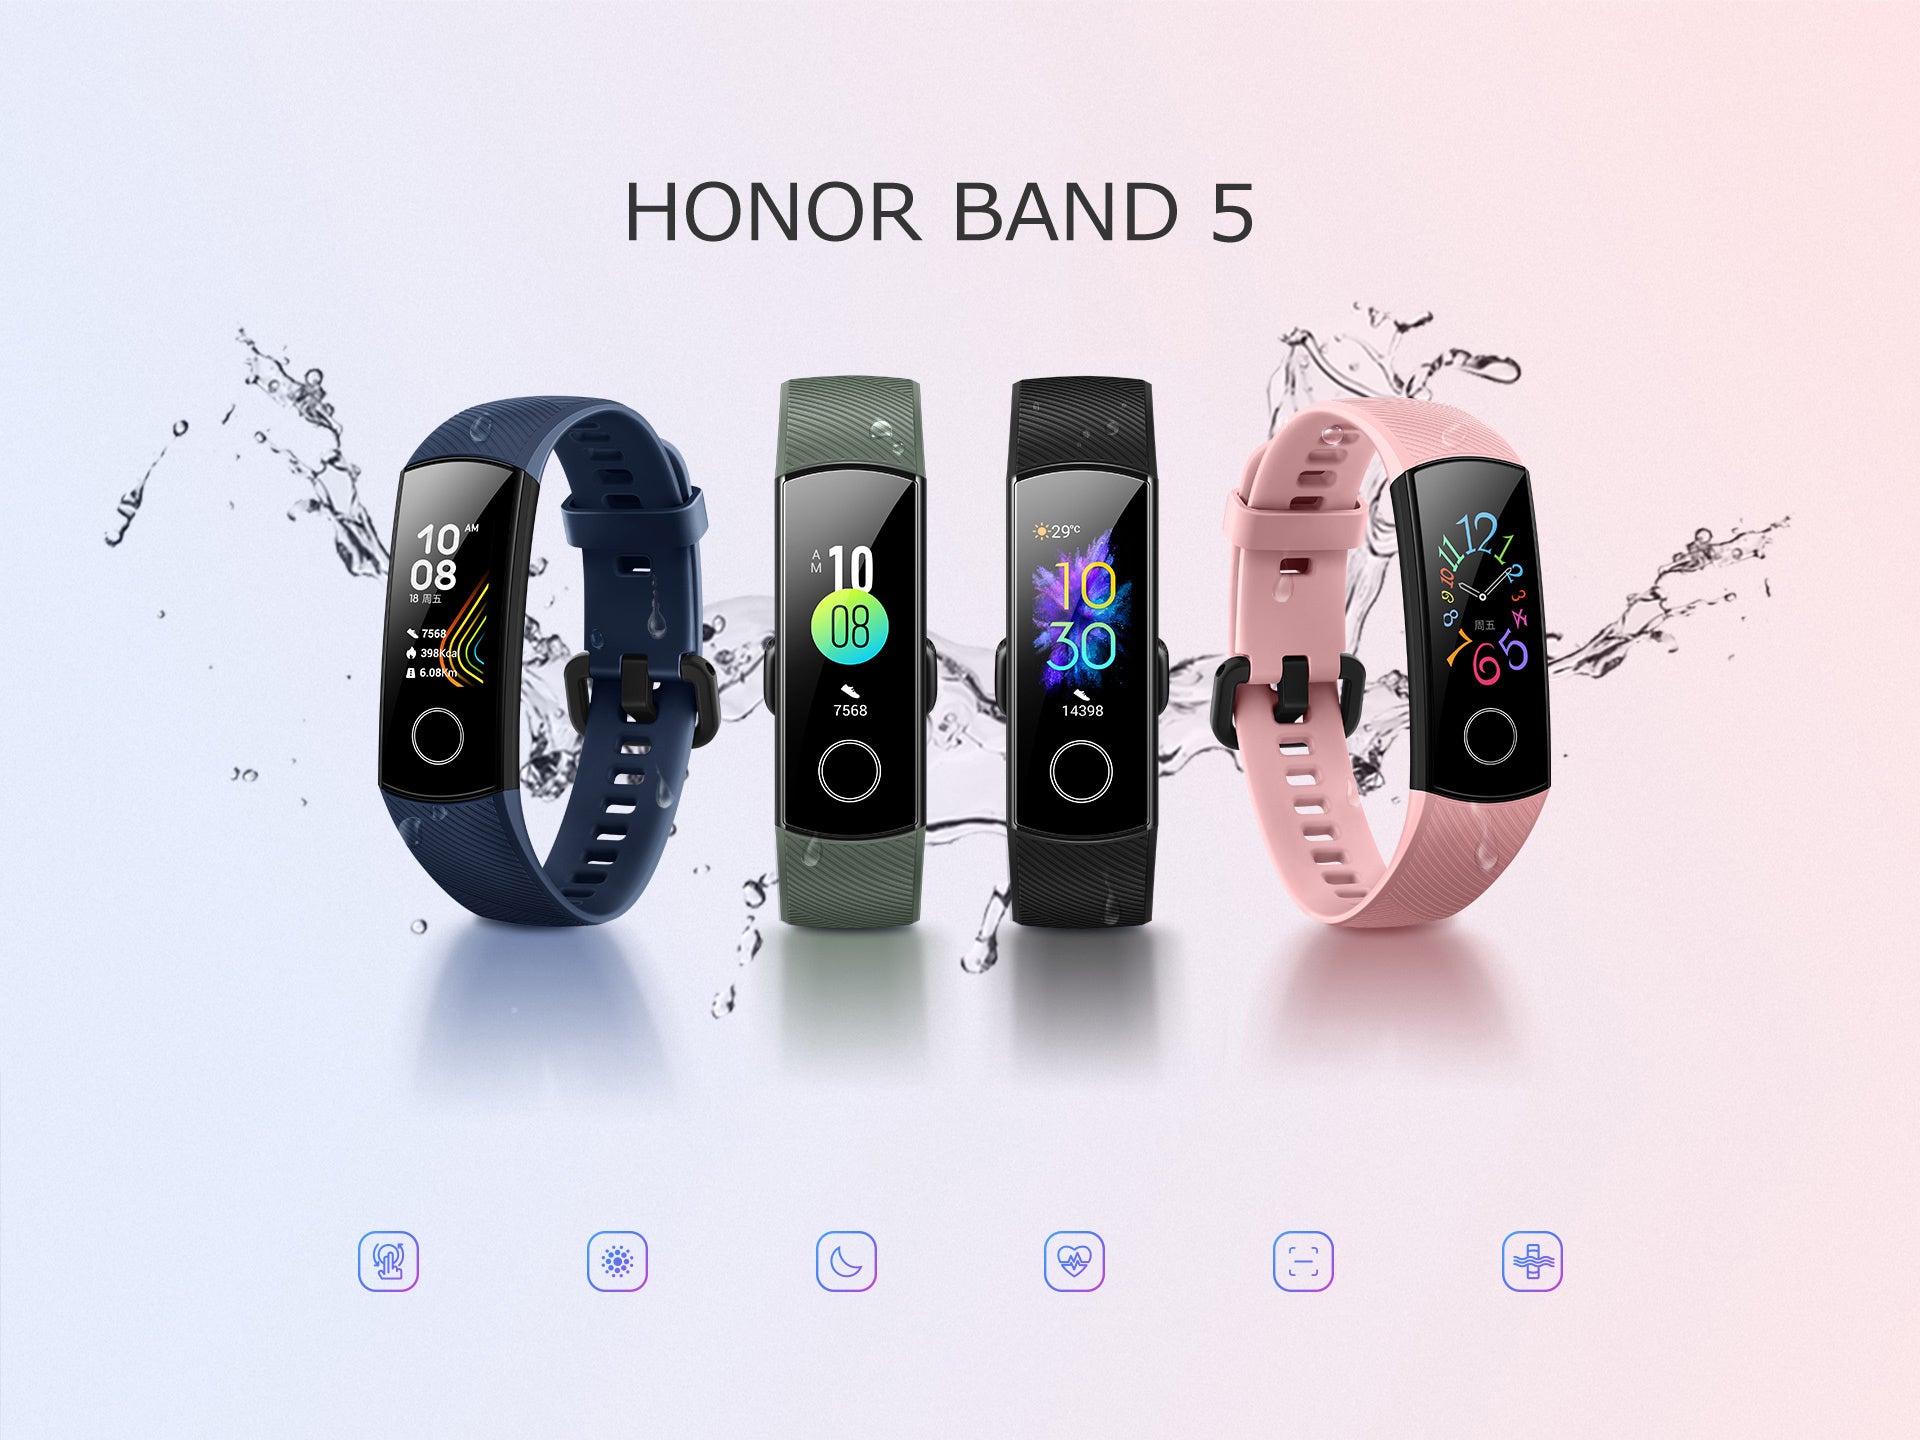 HONOR BAND 5 PRICE IN INDIA ONLINE